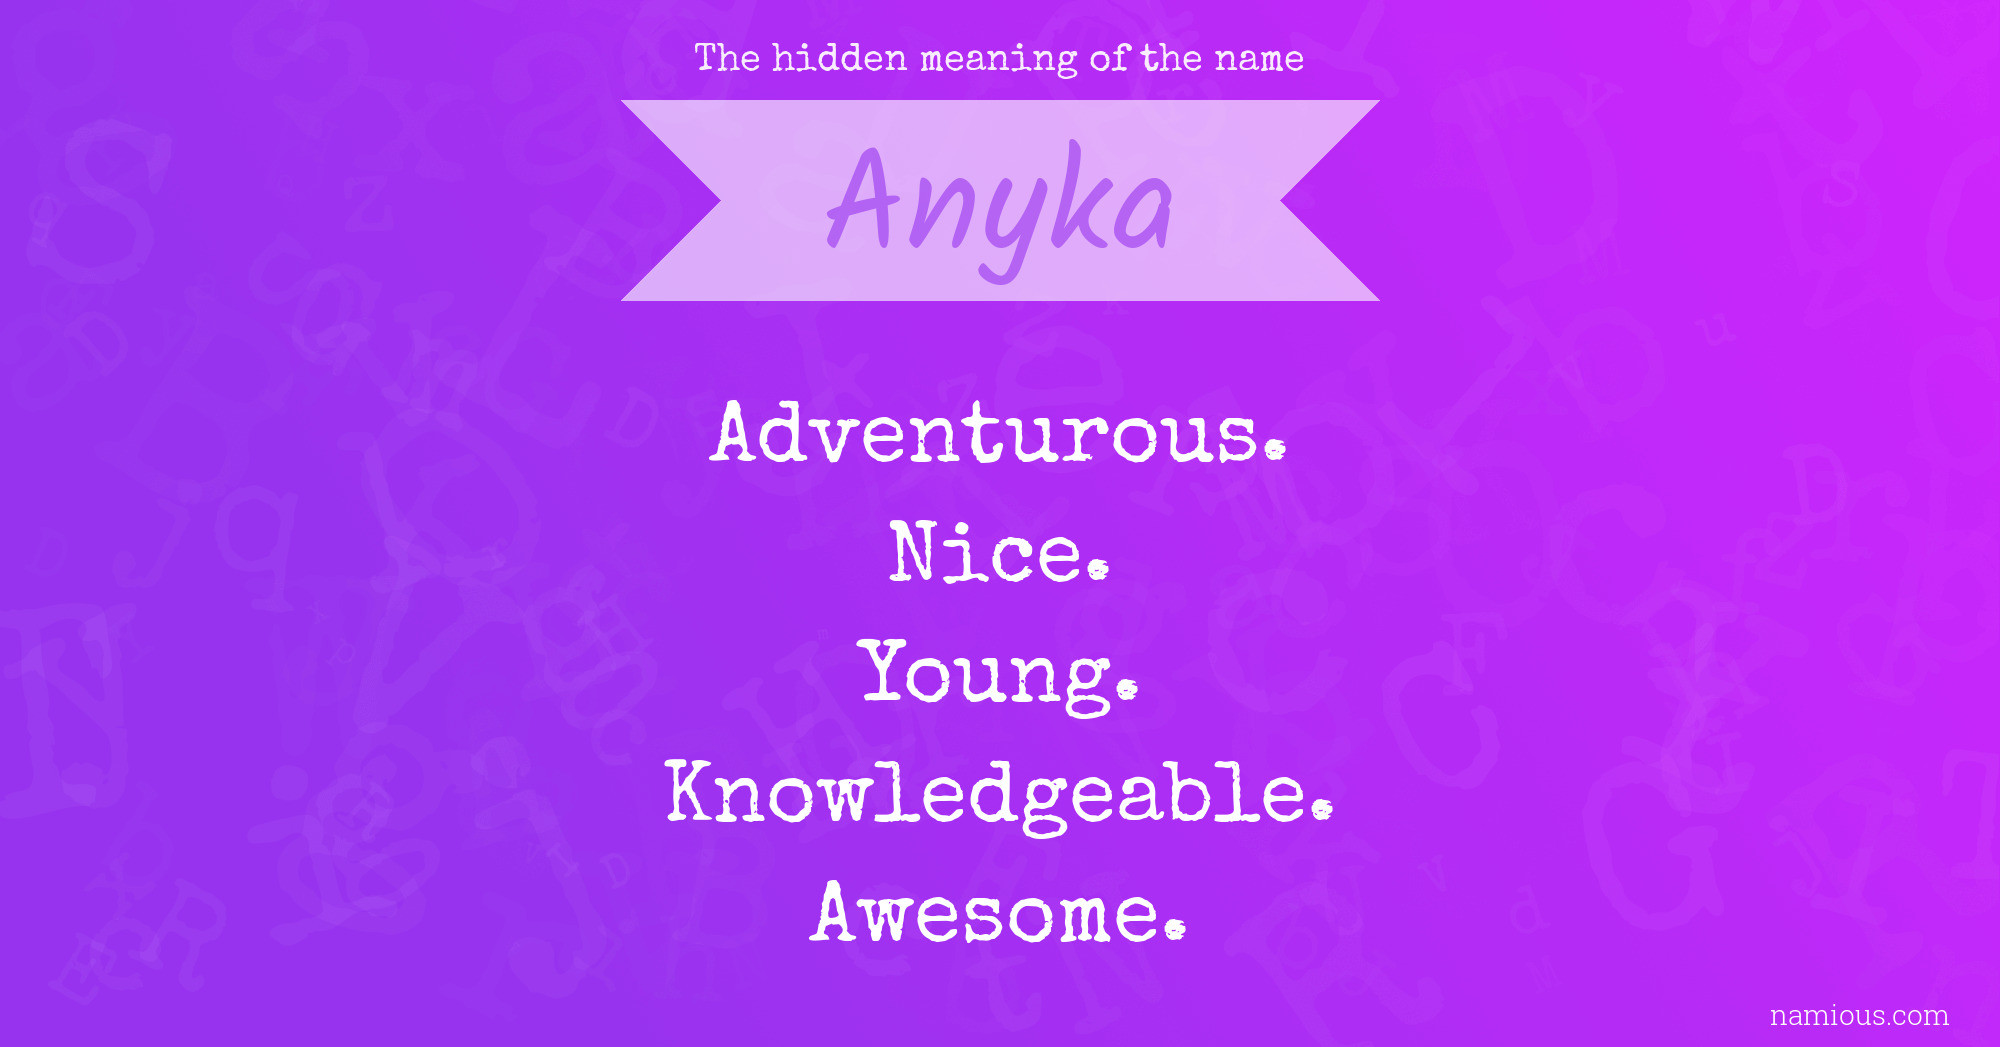 The hidden meaning of the name Anyka